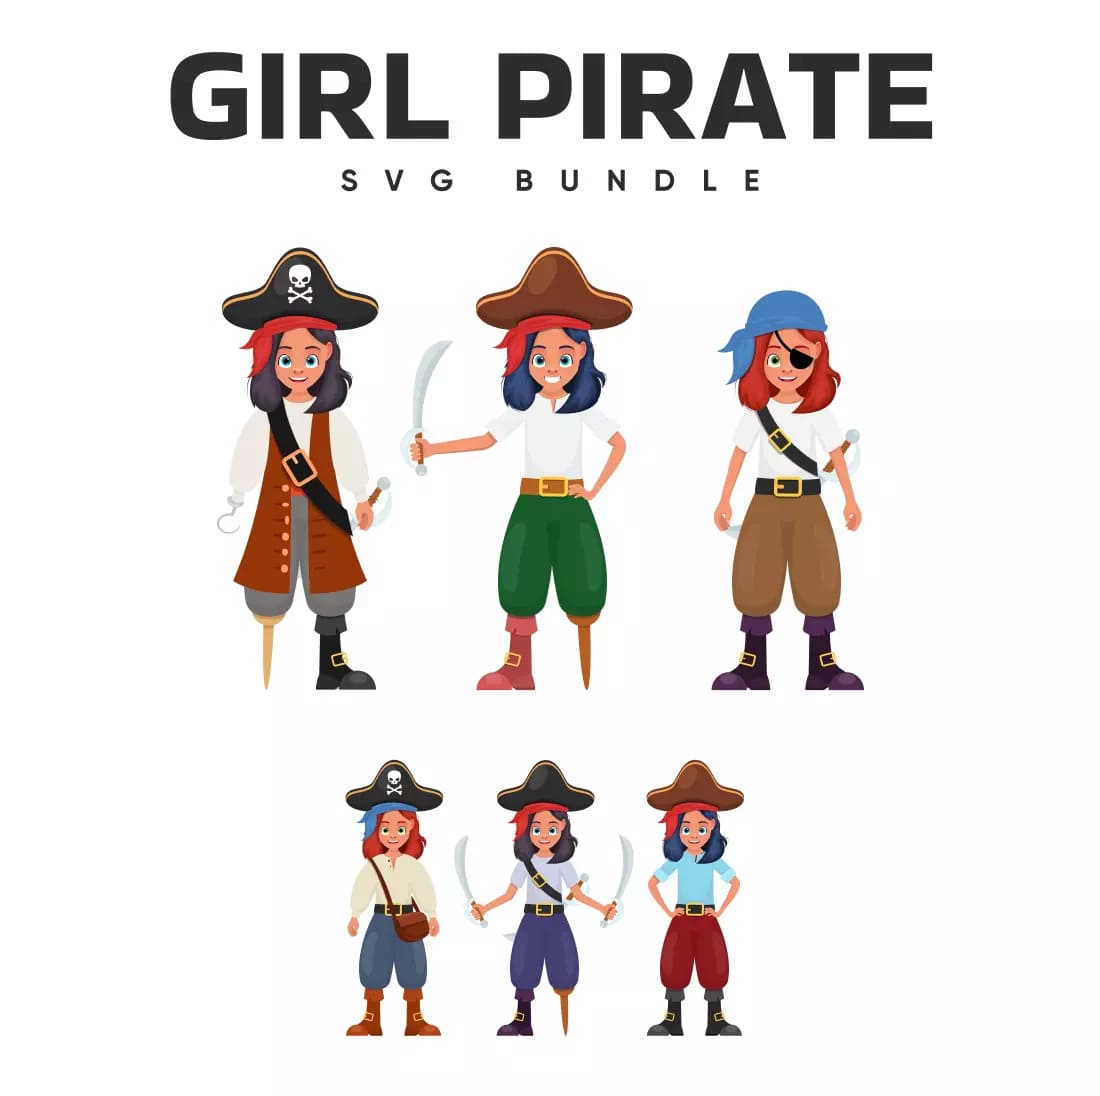 Girl Pirate SVG Bundle Preview image.